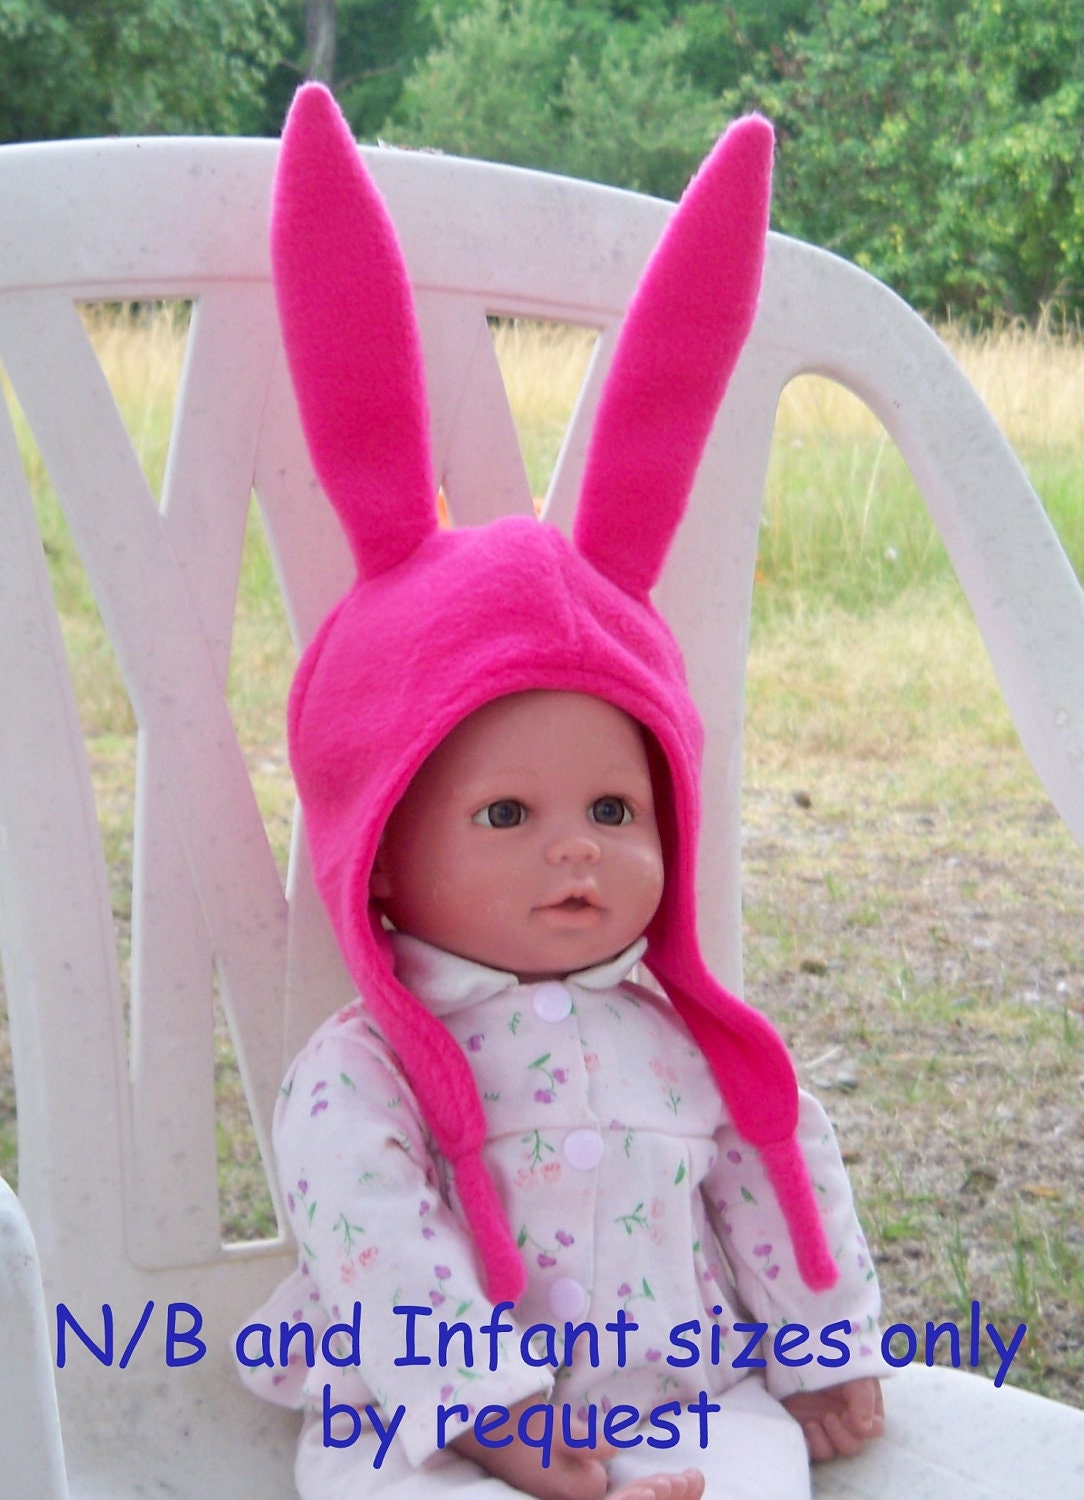 Louise&#39;s Pink Bunny Ears Hat RESERVED LISTING